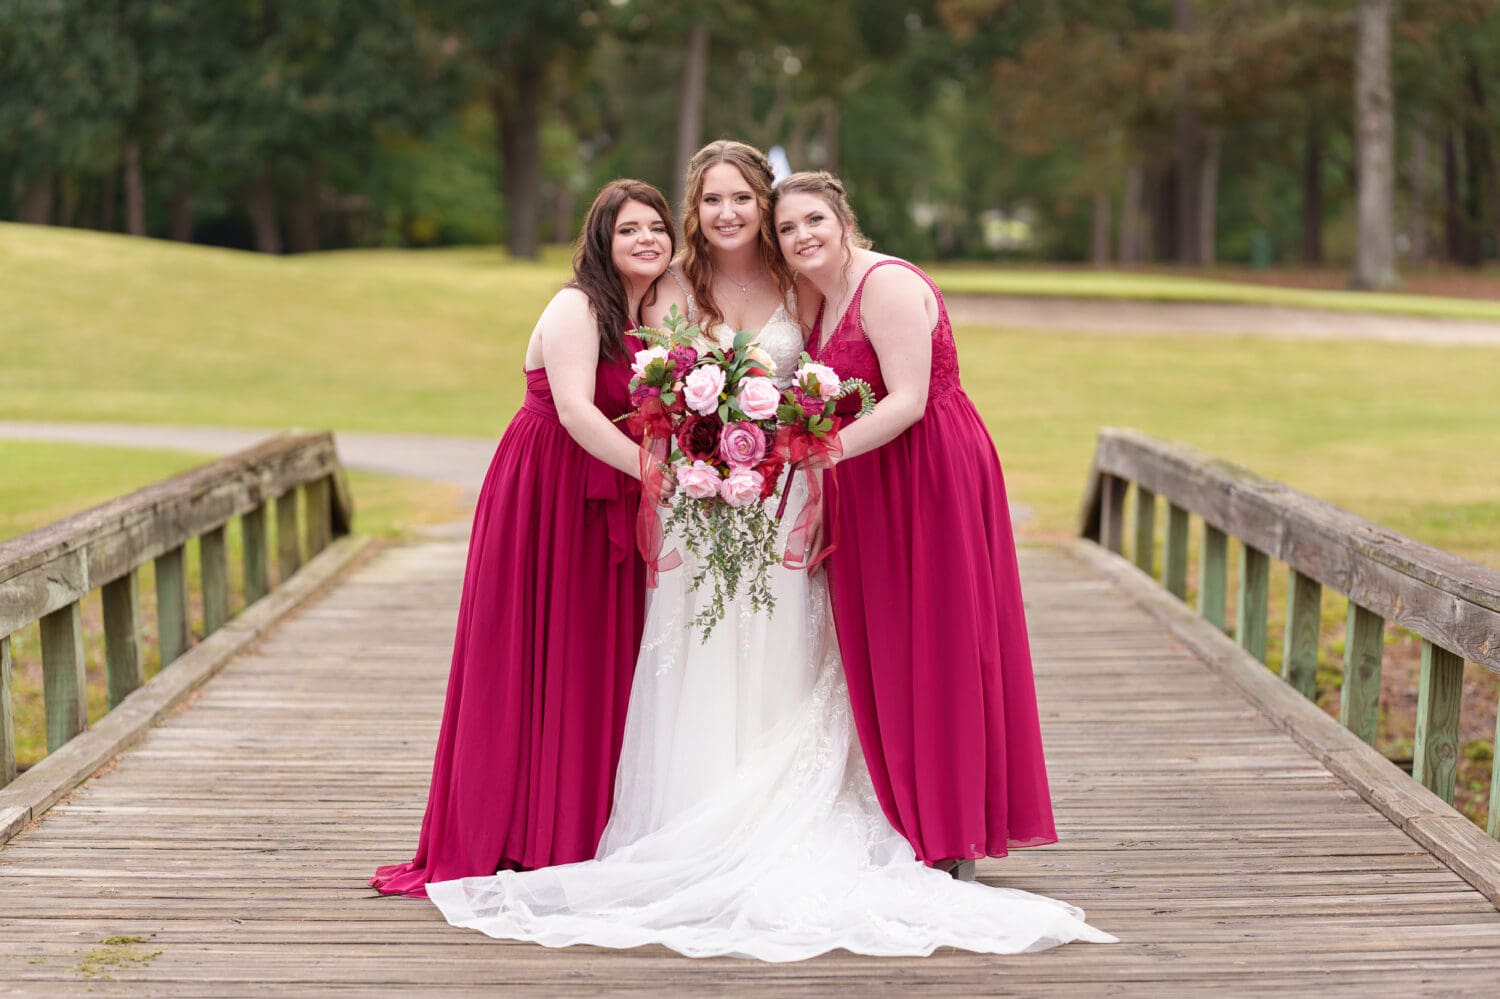 Bridesmaids holding flowers together - Litchfield Country Club